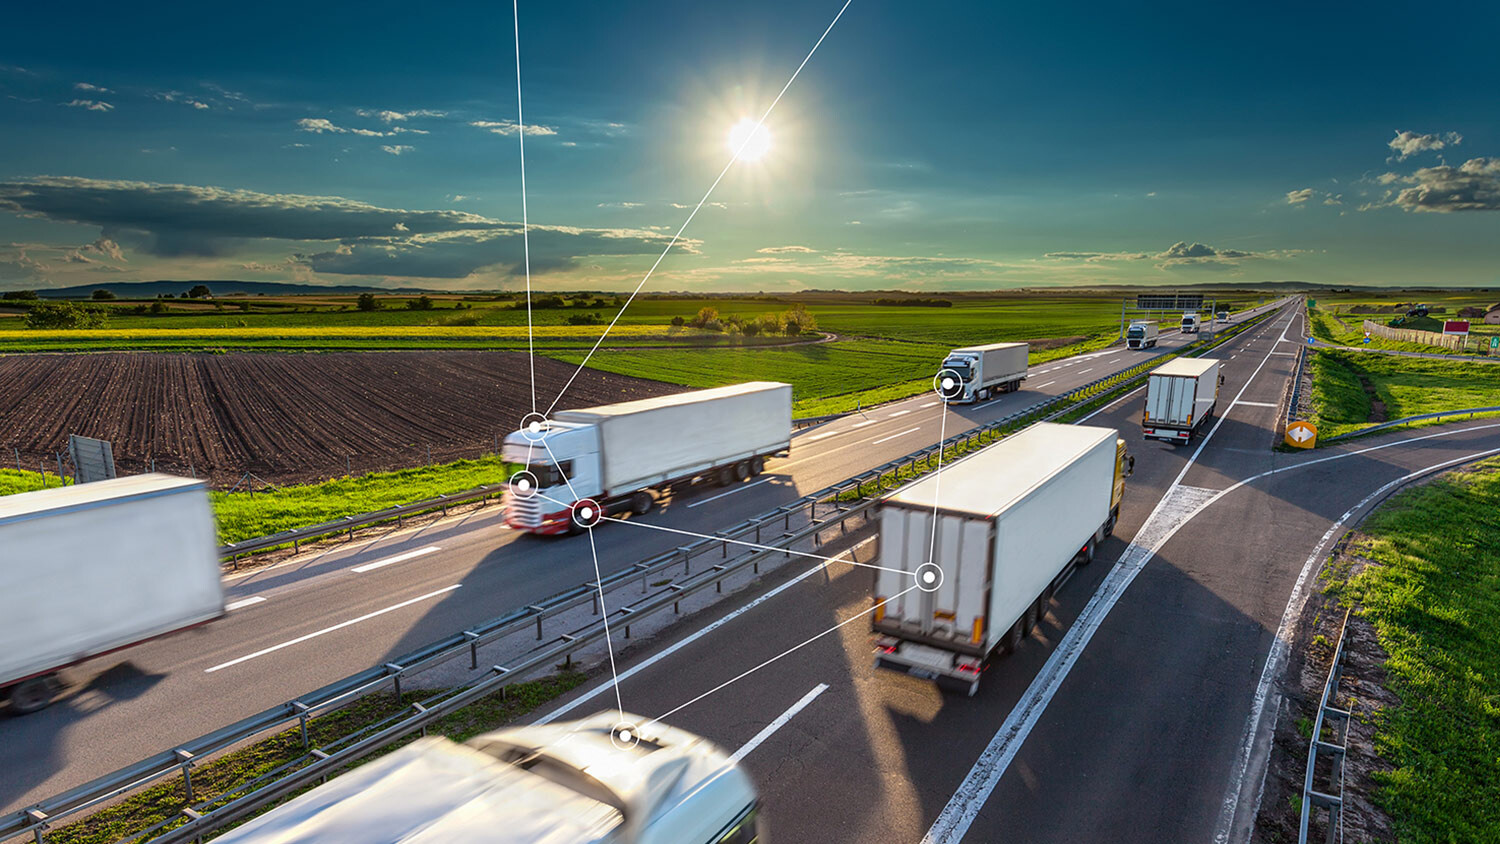 Magic of IoT in transportation for truck industry - Ericsson